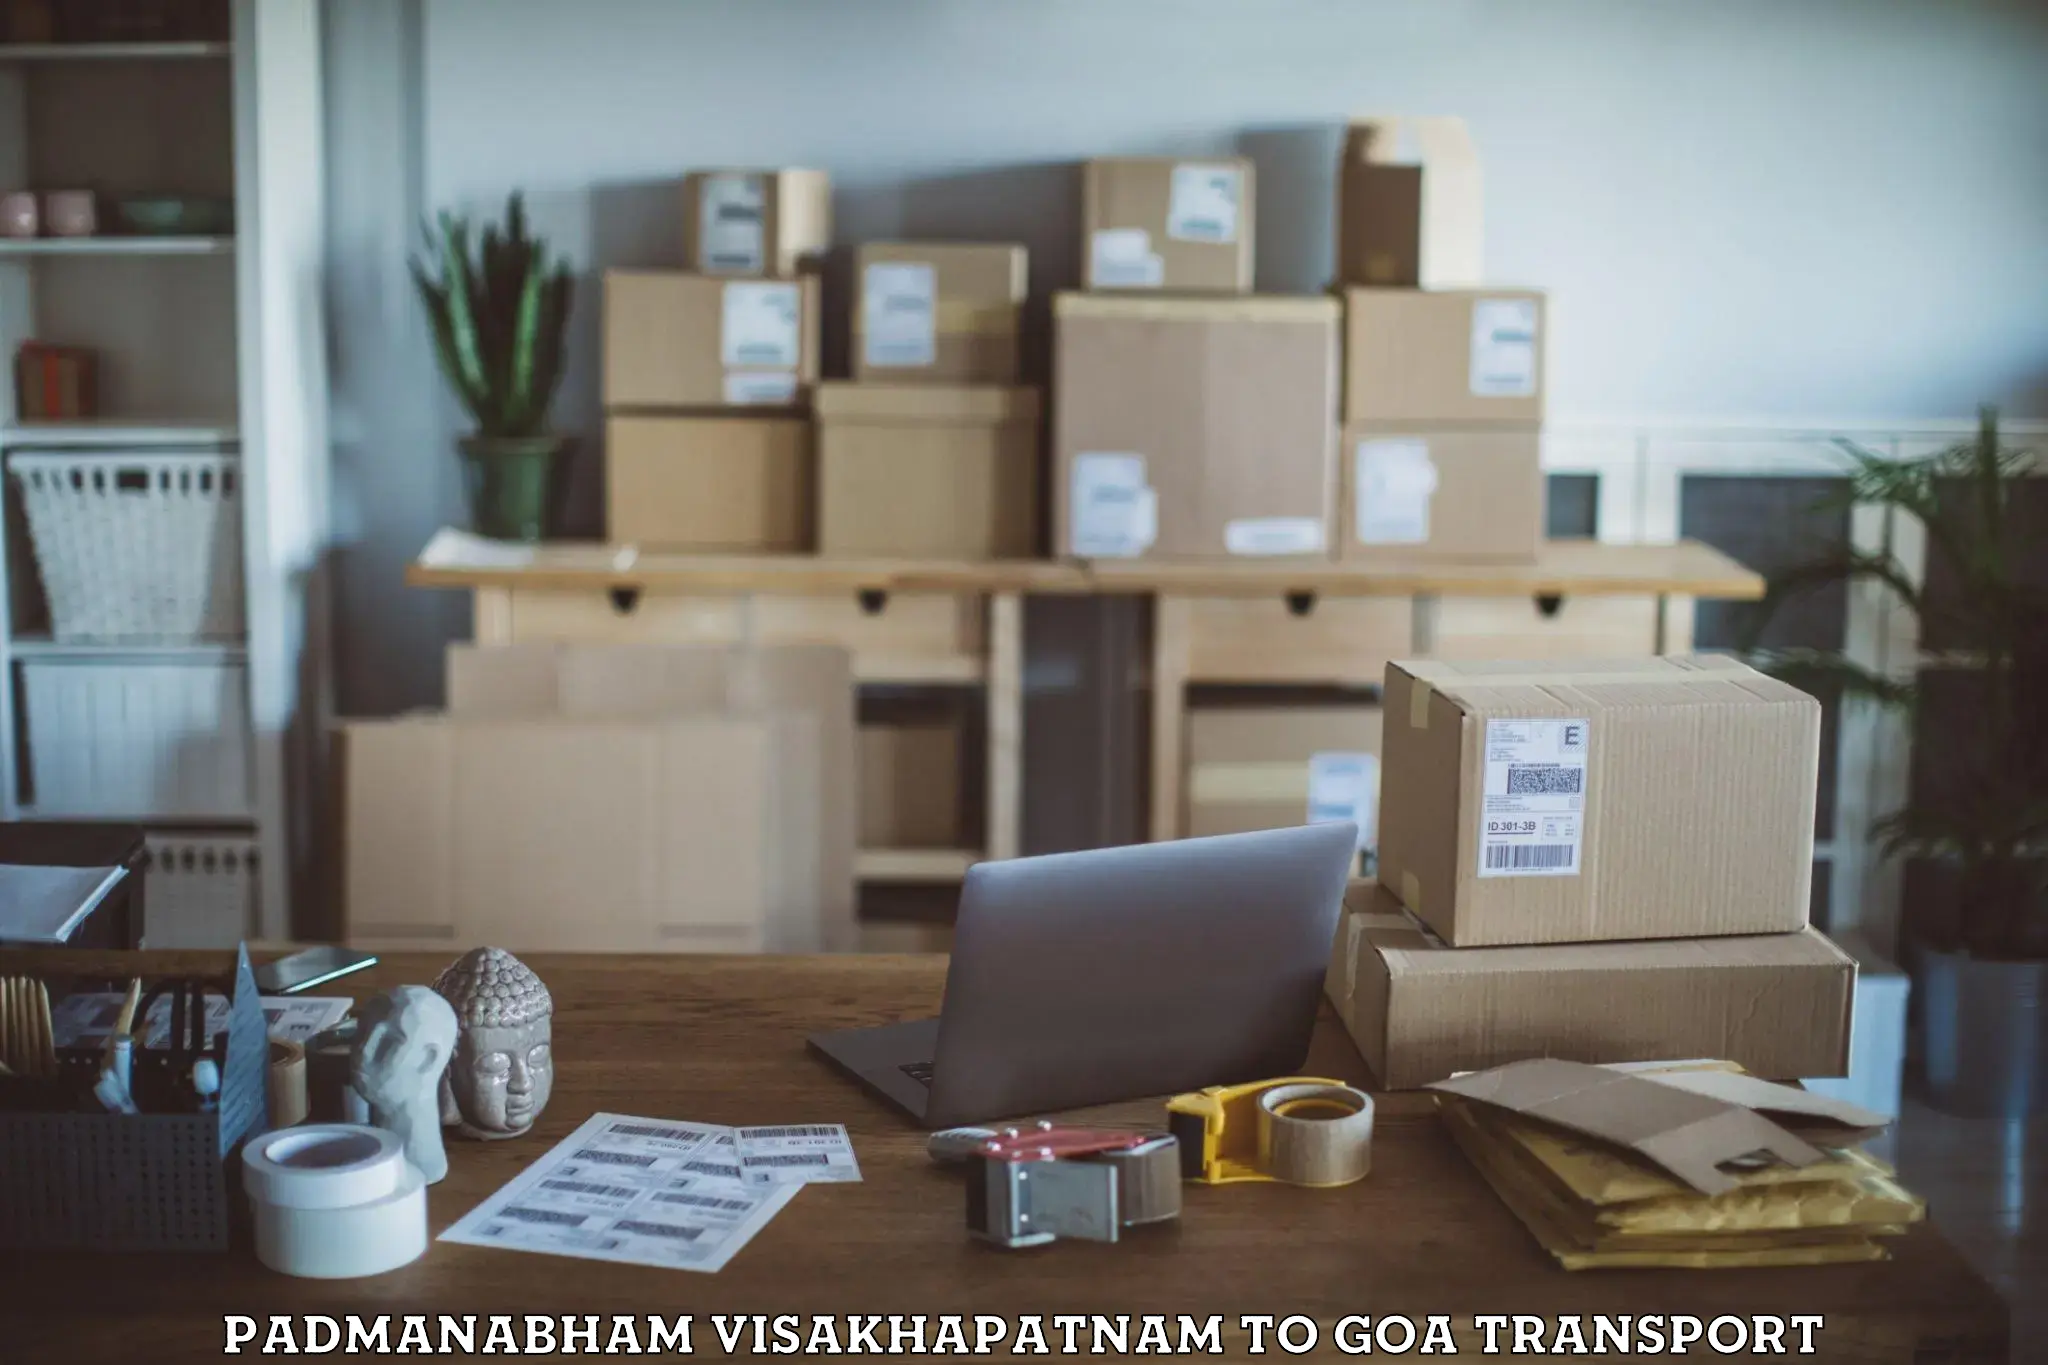 Transport bike from one state to another Padmanabham Visakhapatnam to Goa